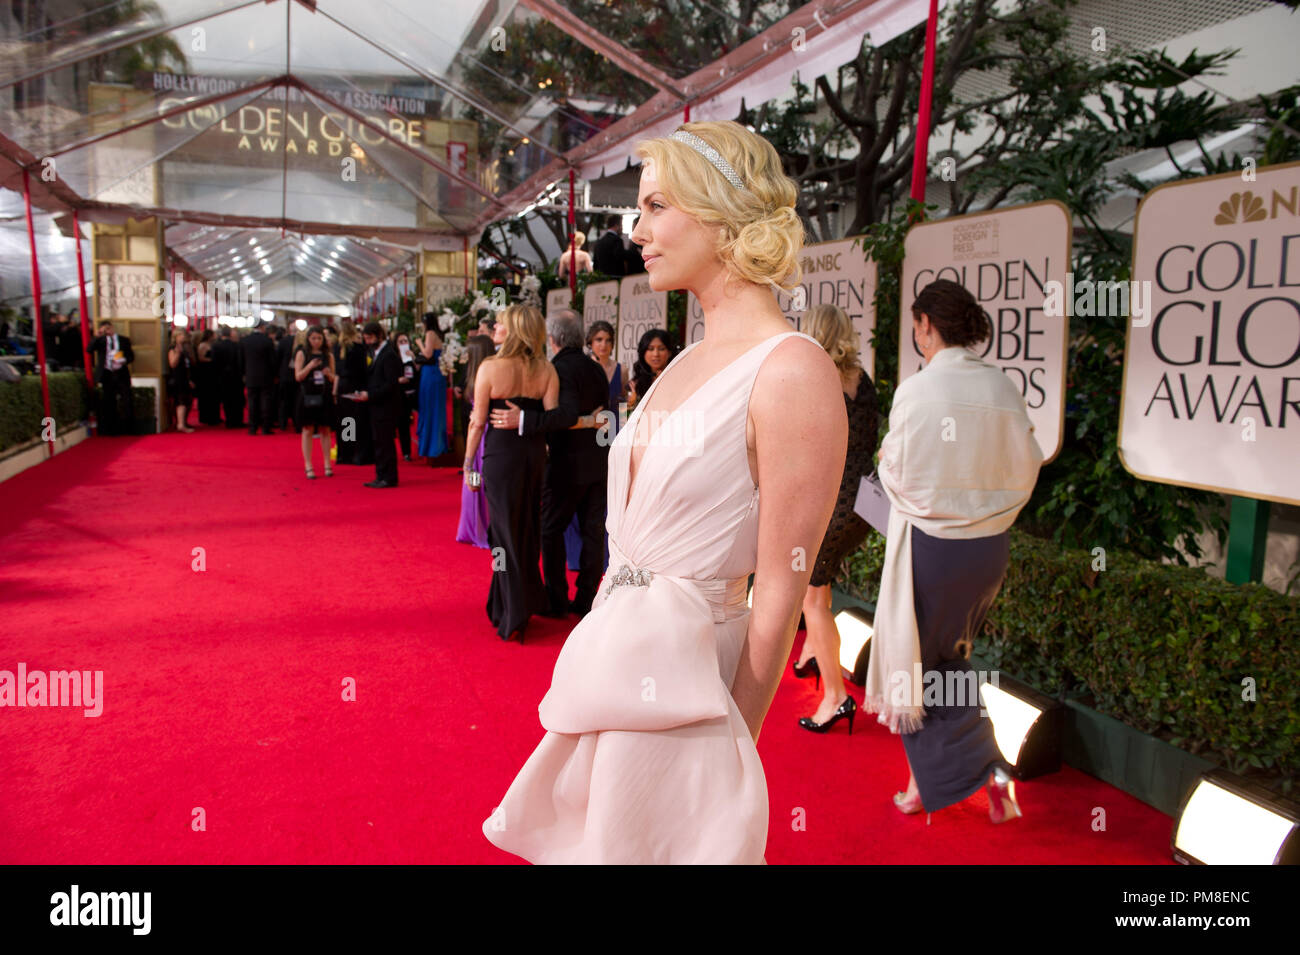 Nominated for BEST PERFORMANCE BY AN ACTRESS IN A MOTION PICTURE – COMEDY OR MUSICAL for her role in “Young Adult”, actress Charlize Theron attends the 69th Annual Golden Globes Awards at the Beverly Hilton in Beverly Hills, CA on Sunday, January 15, 2012. Stock Photo